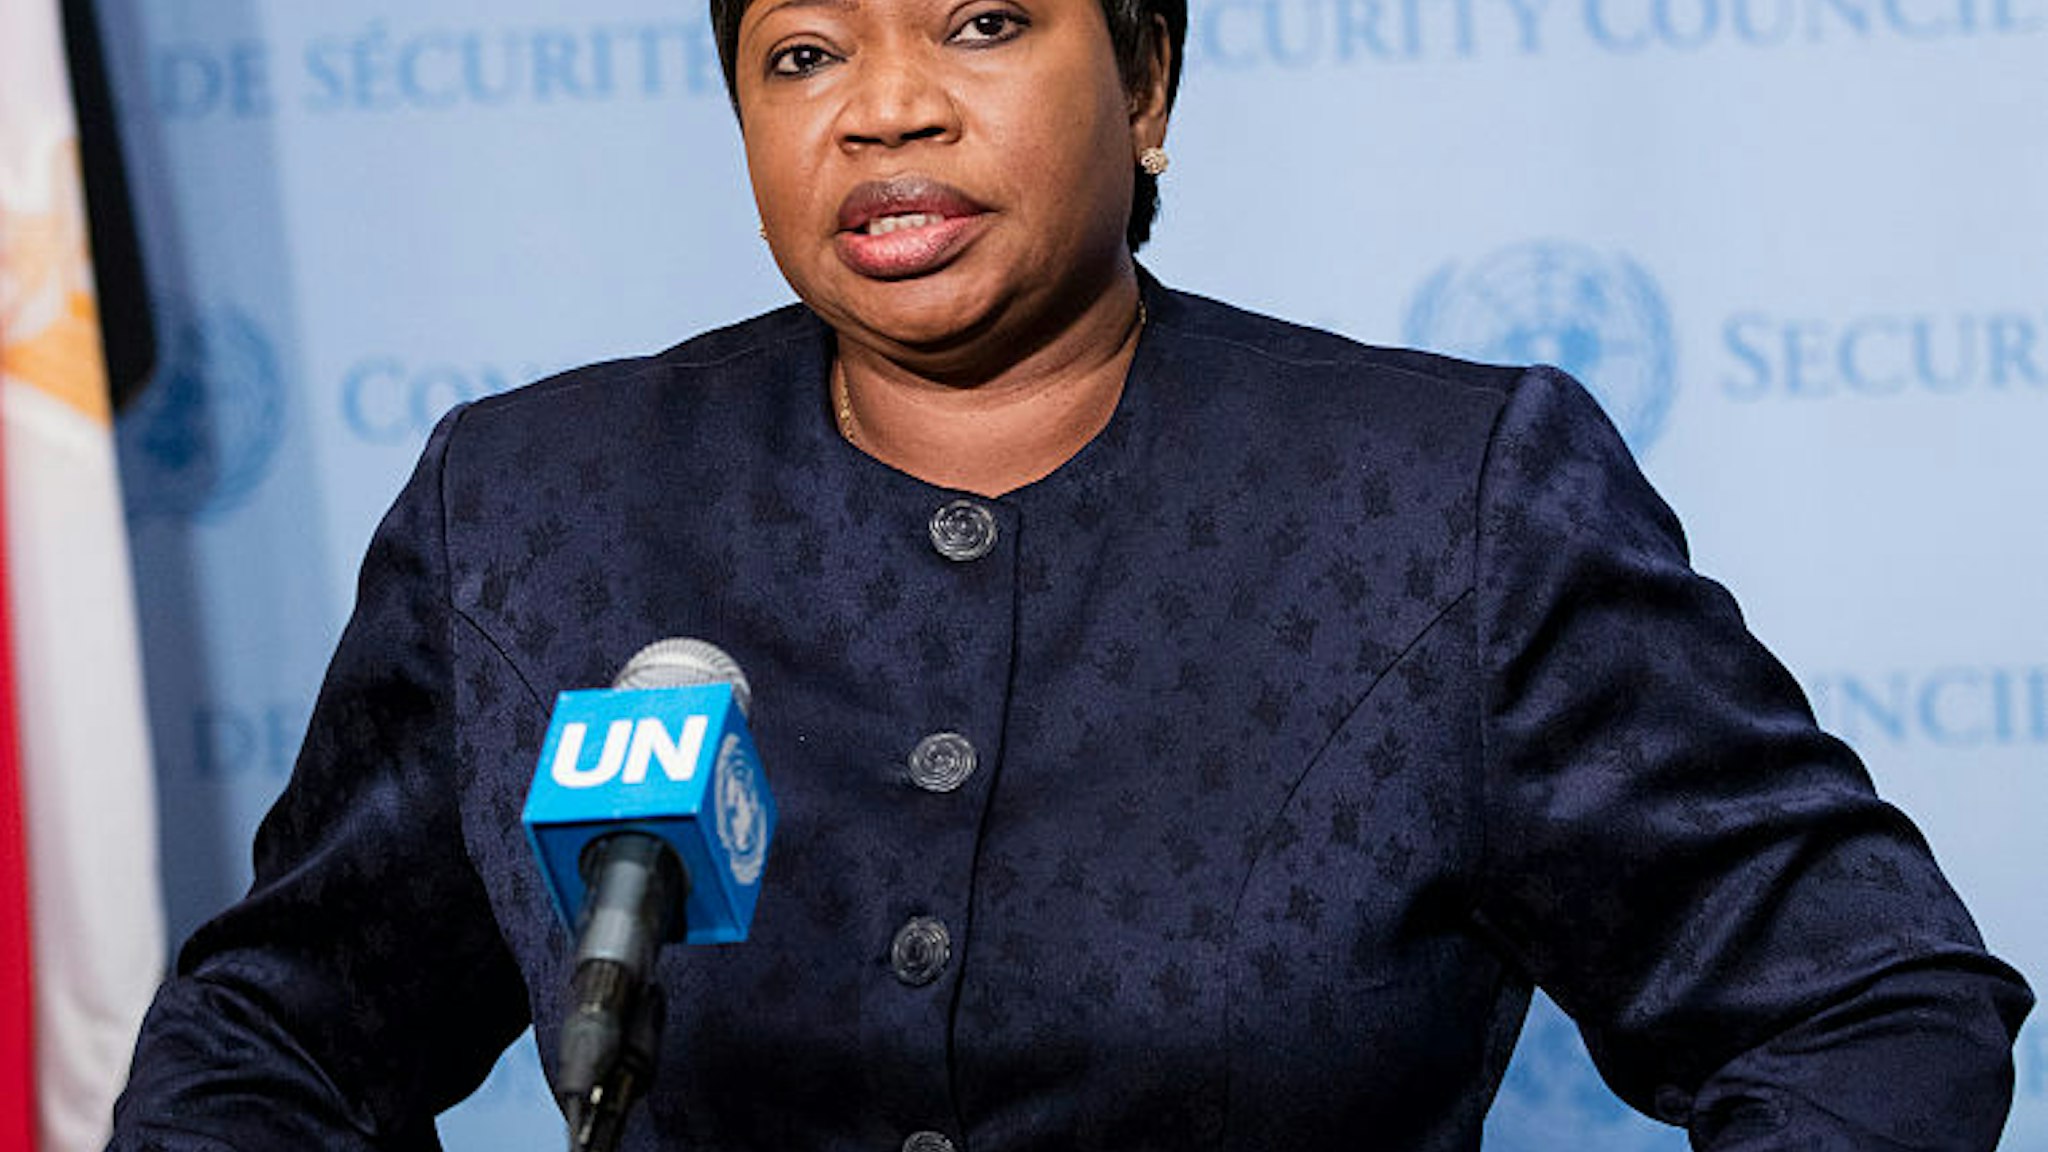 UNITED NATIONS, NEW YORK, NY, UNITED STATES - 2016/05/26: Fatou Bensouda, Prosecutor of the International Criminal Court (ICC), speaks to journalists after briefing the Security Council at its meeting on the situation in Libya today at the UN Headquarters in New York.